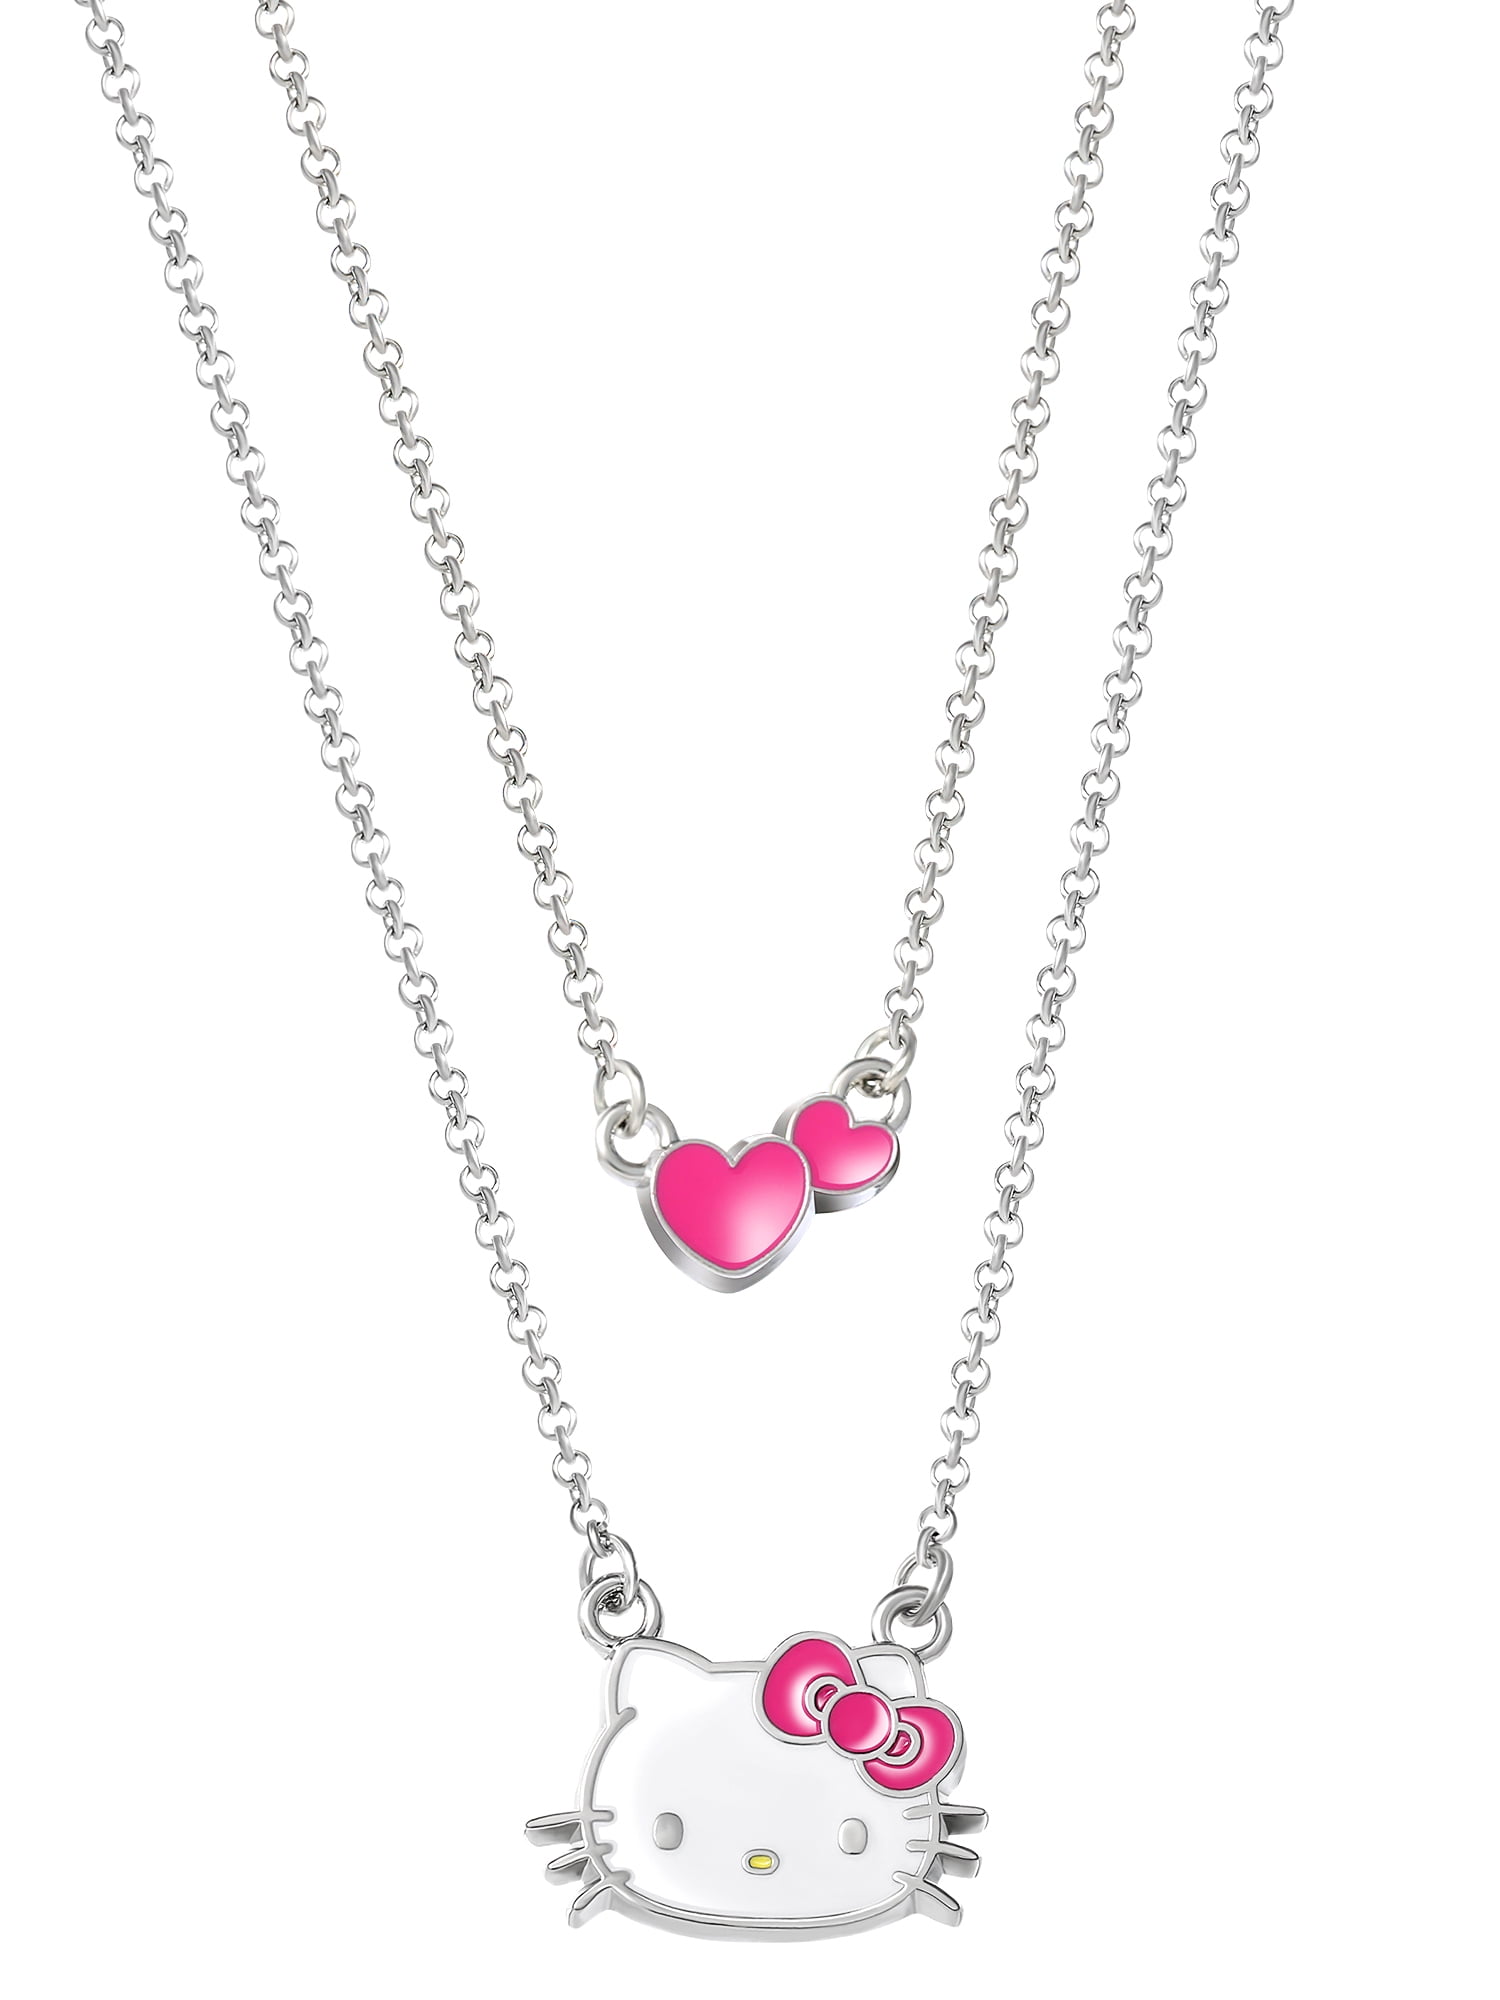 Pretty Beautiful Enameled Hello Kitty Necklace for Girls′ Accessories -  China Necklace and Hello Kitty Necklace price